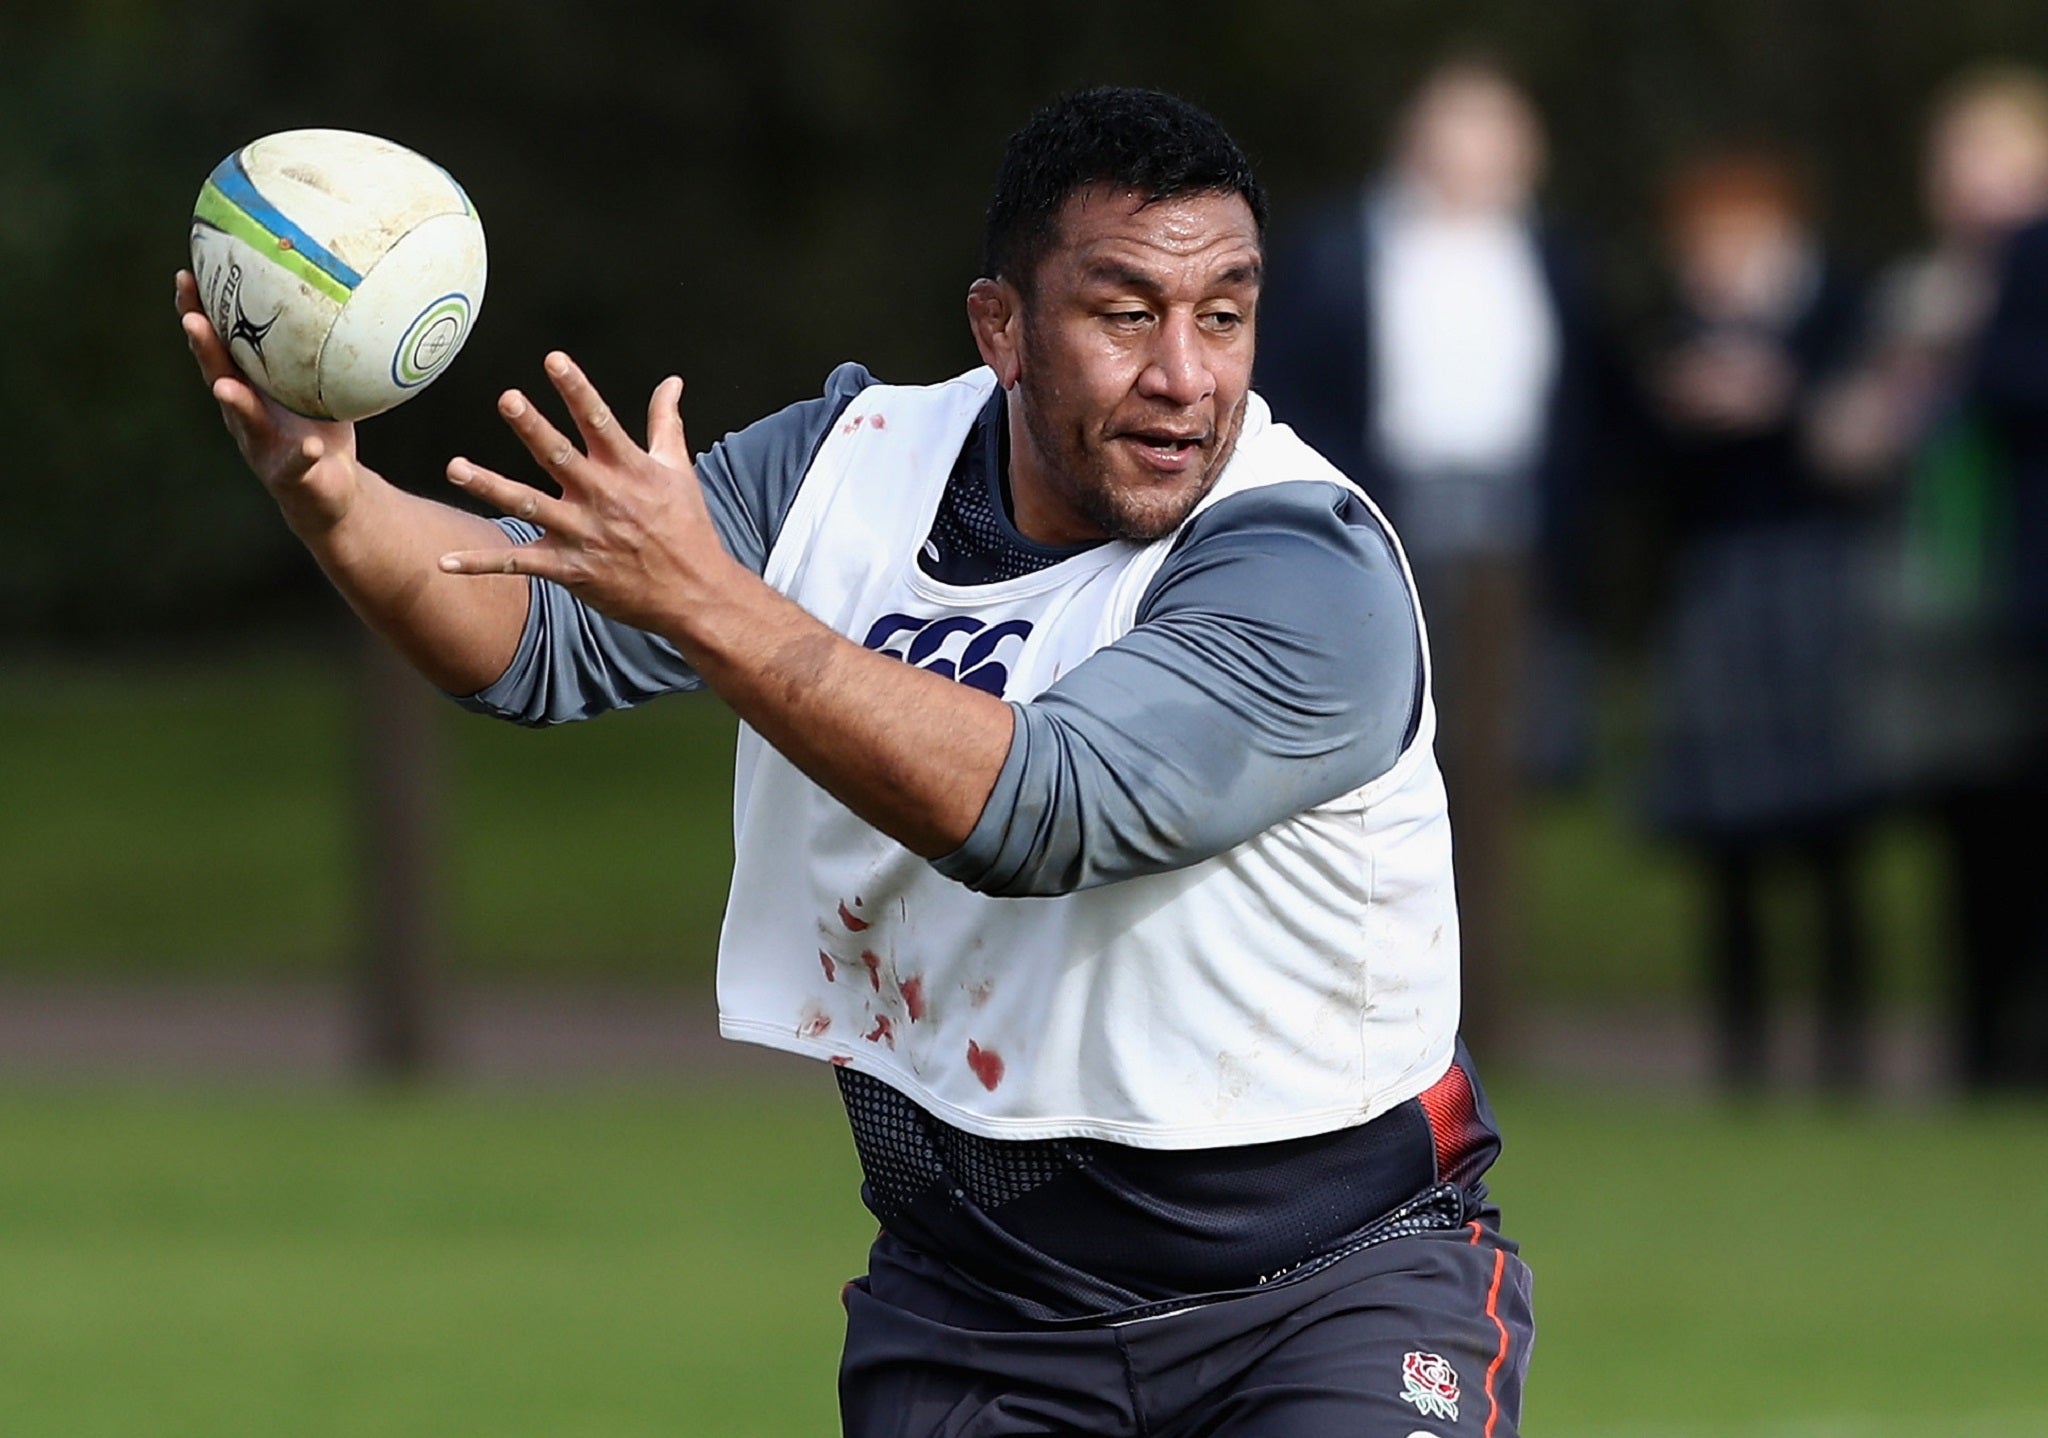 Mako Vunipola's recovery has helped spur on his brother's return to the England squad